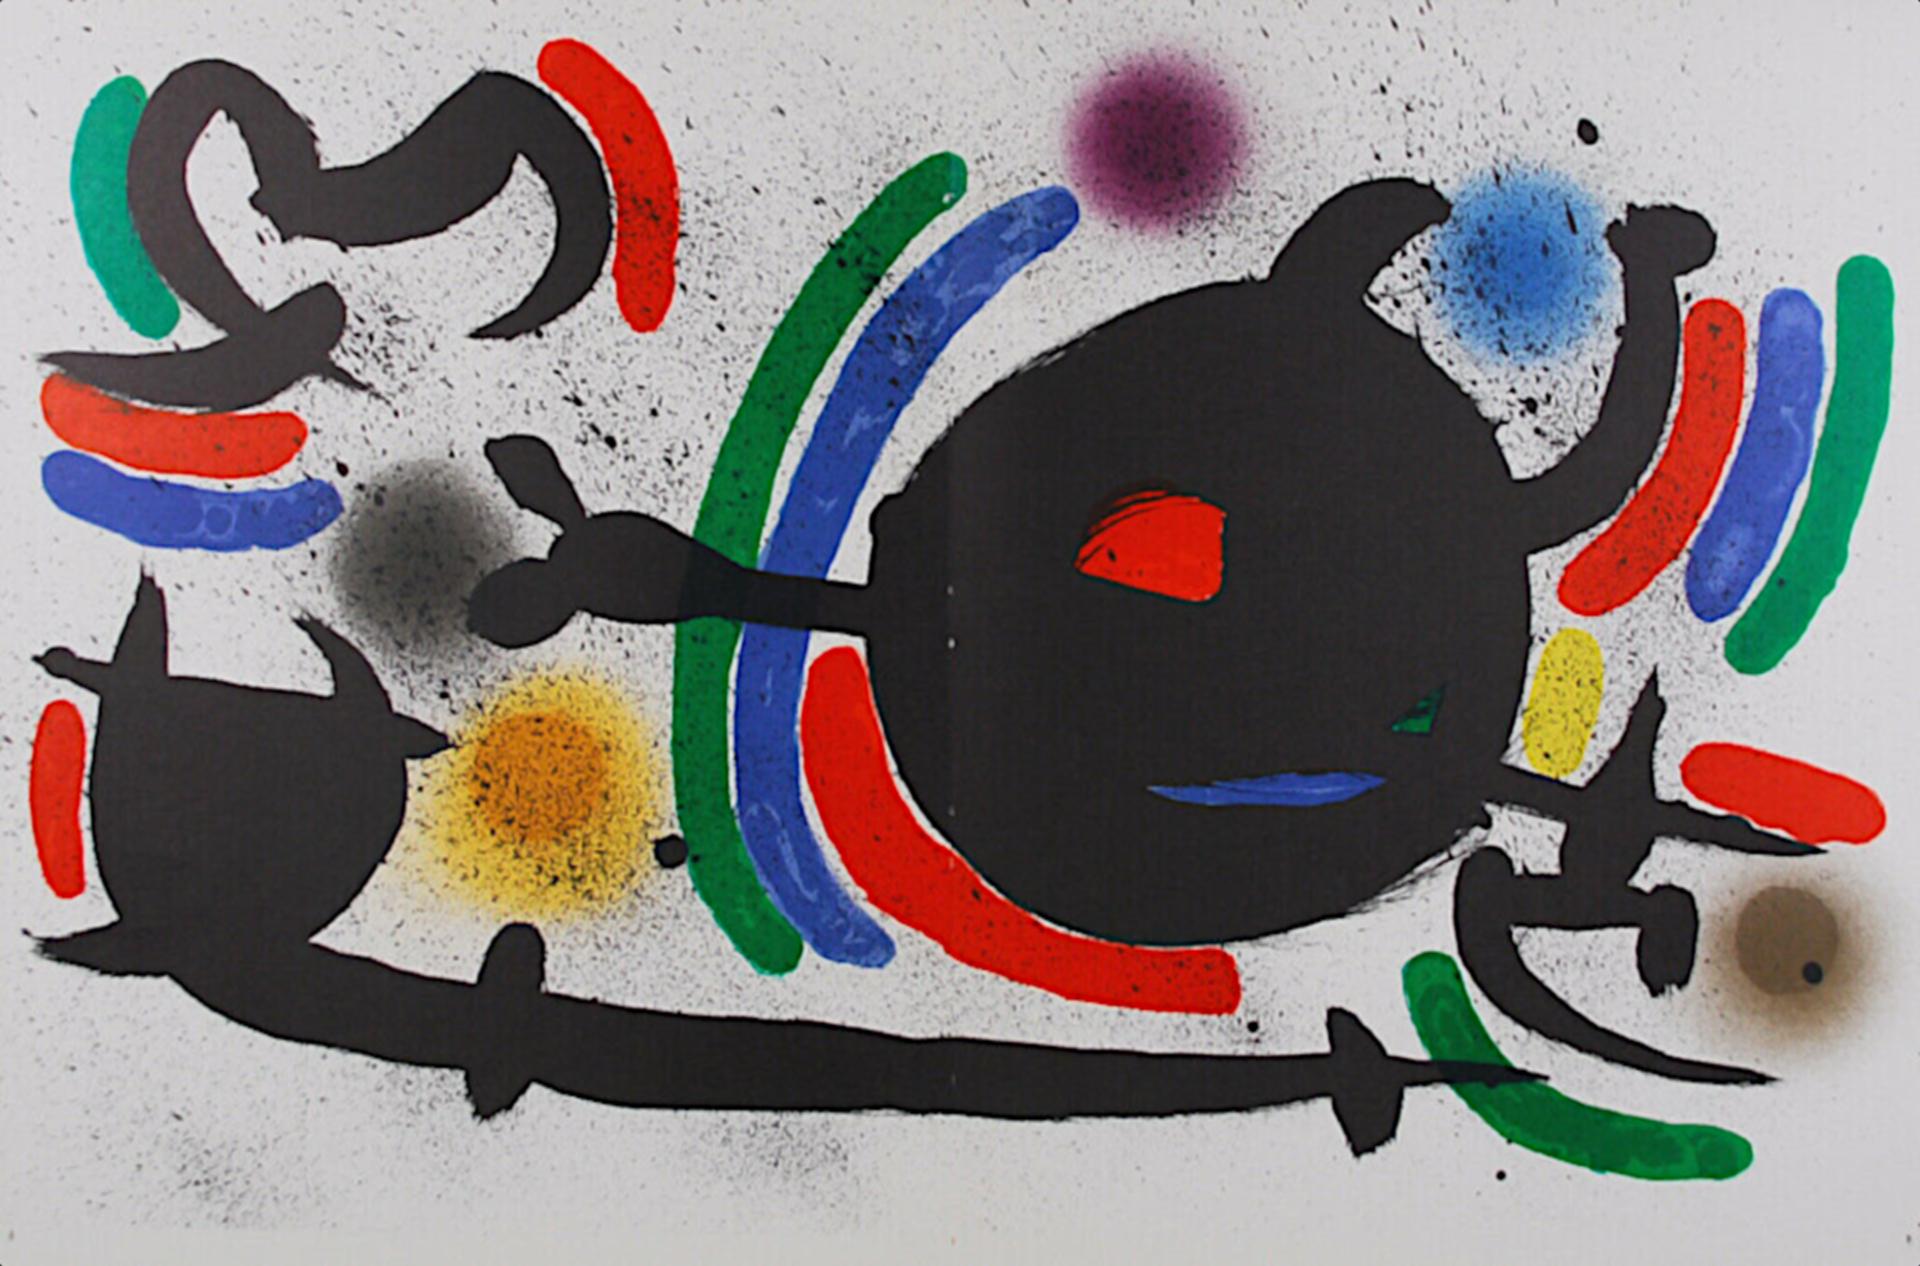 Joan Miró - "Original Lithography X".

Lithograph in colors from Litografo (Volume I) Spanish edition from 1972.

Catalogue of works: Mourlot 866.

Slight book fold in the centre of the paper.

Miró's development of a new pictorial language led to a